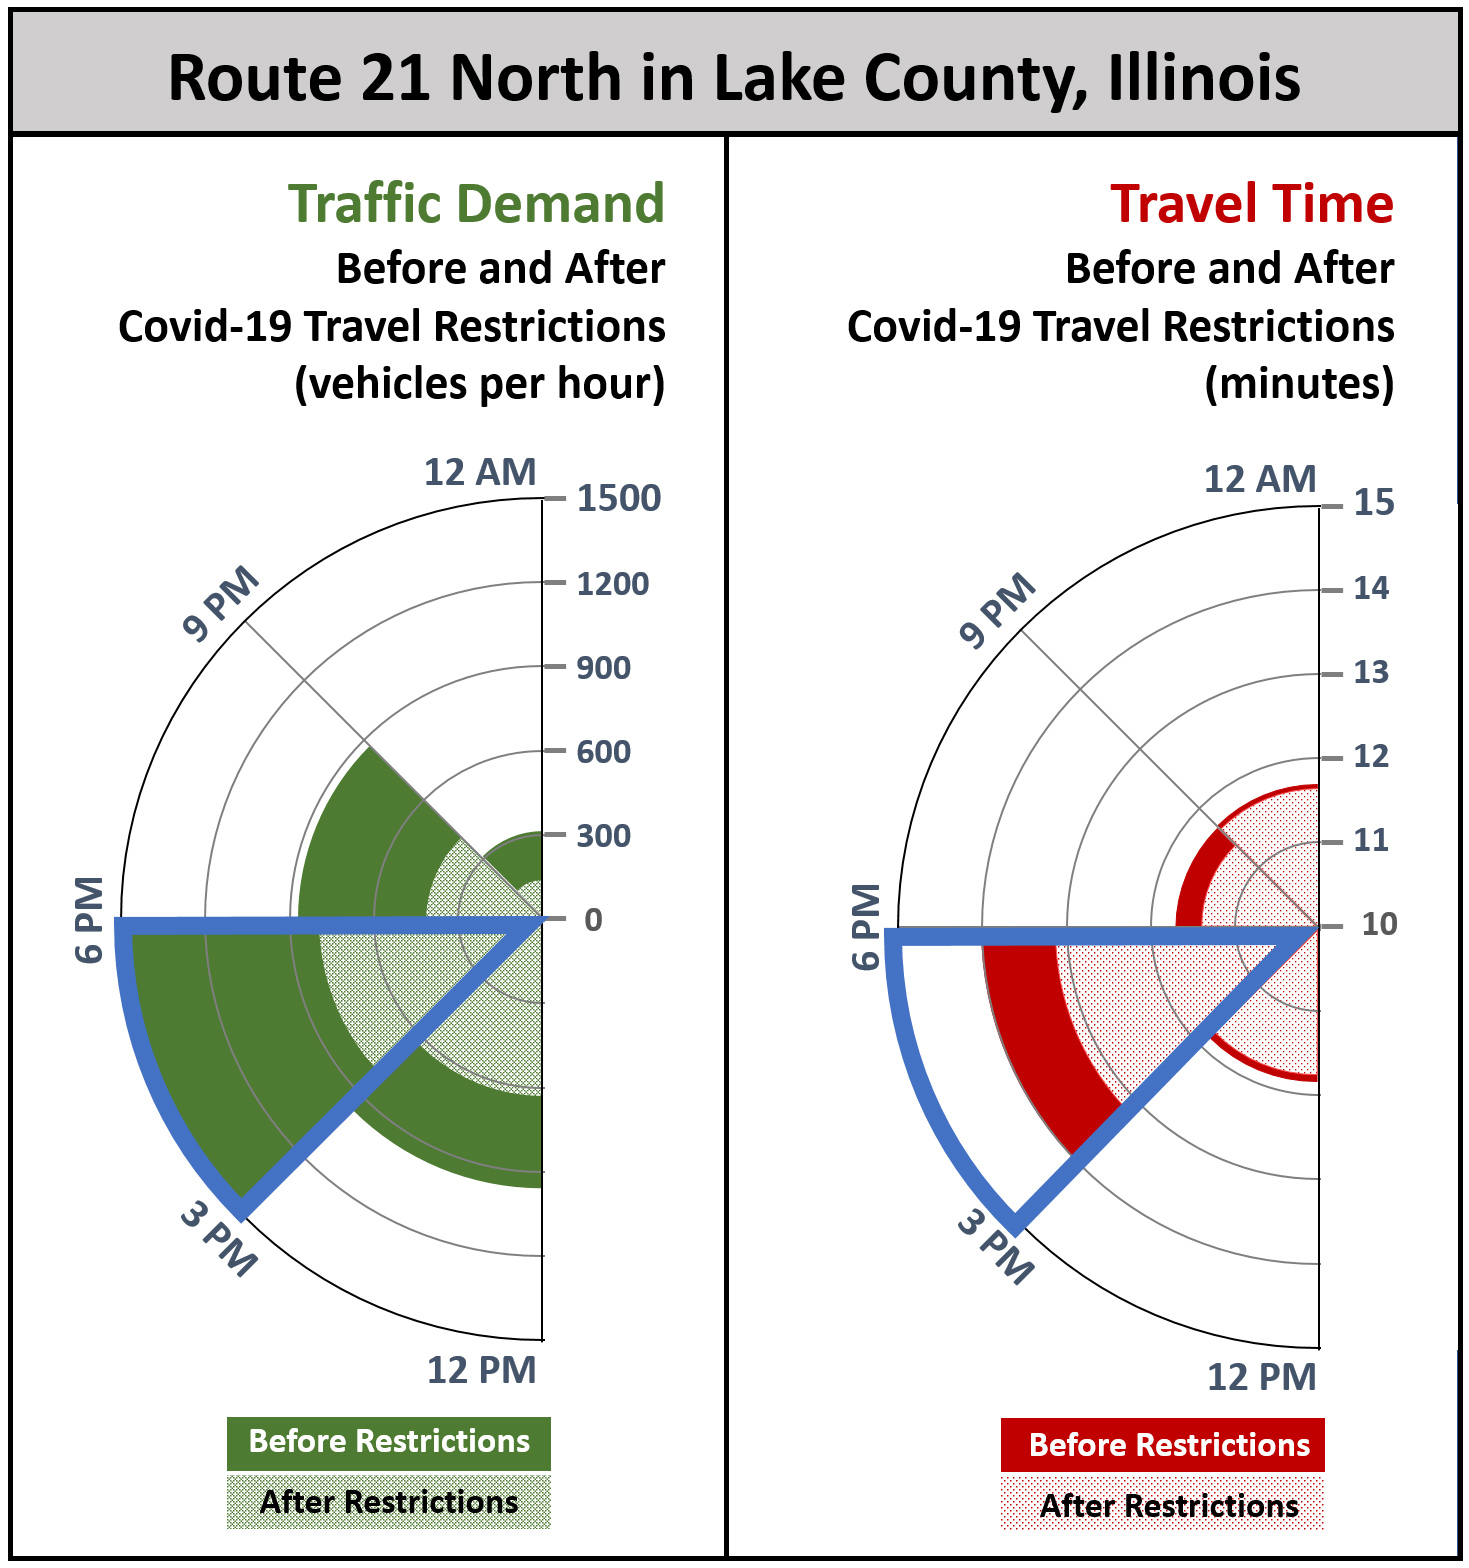 Graphic showing traffic demand and travel time for Route 21 in Lake County, Illinois, before and after travel restrictions related to COVID-19. In the highlighted timeframe, 3-6 pm, traffic demand indicates 1200 vehicles per hour before restrictions and 800 vehicles per hour after restrictions. Travel time during the same period was 12 minutes or less before restrictions but above 13 minutes after restrictions. 